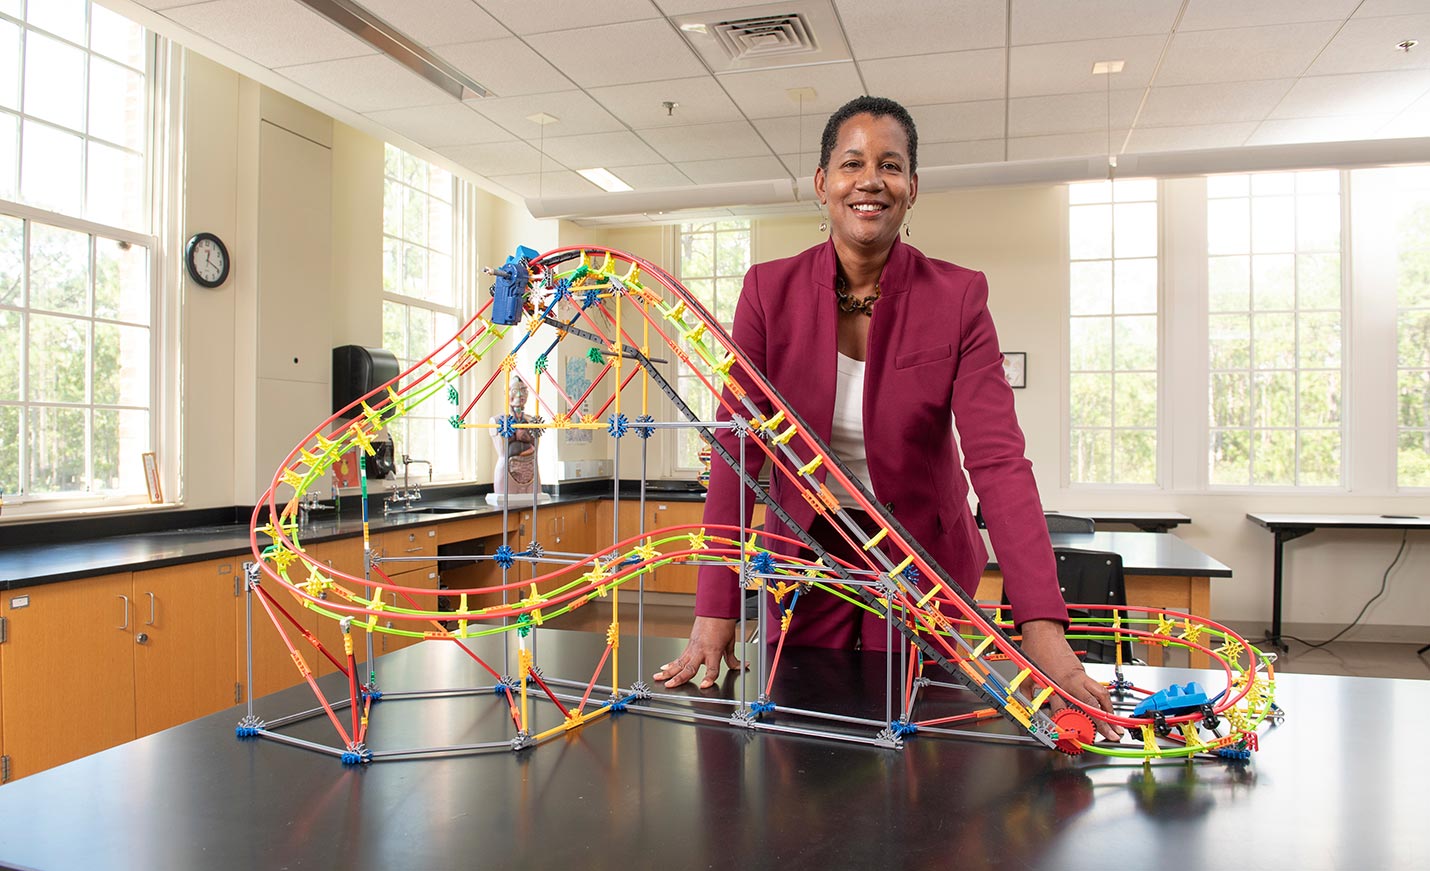 Teacher with a rollercoaster model